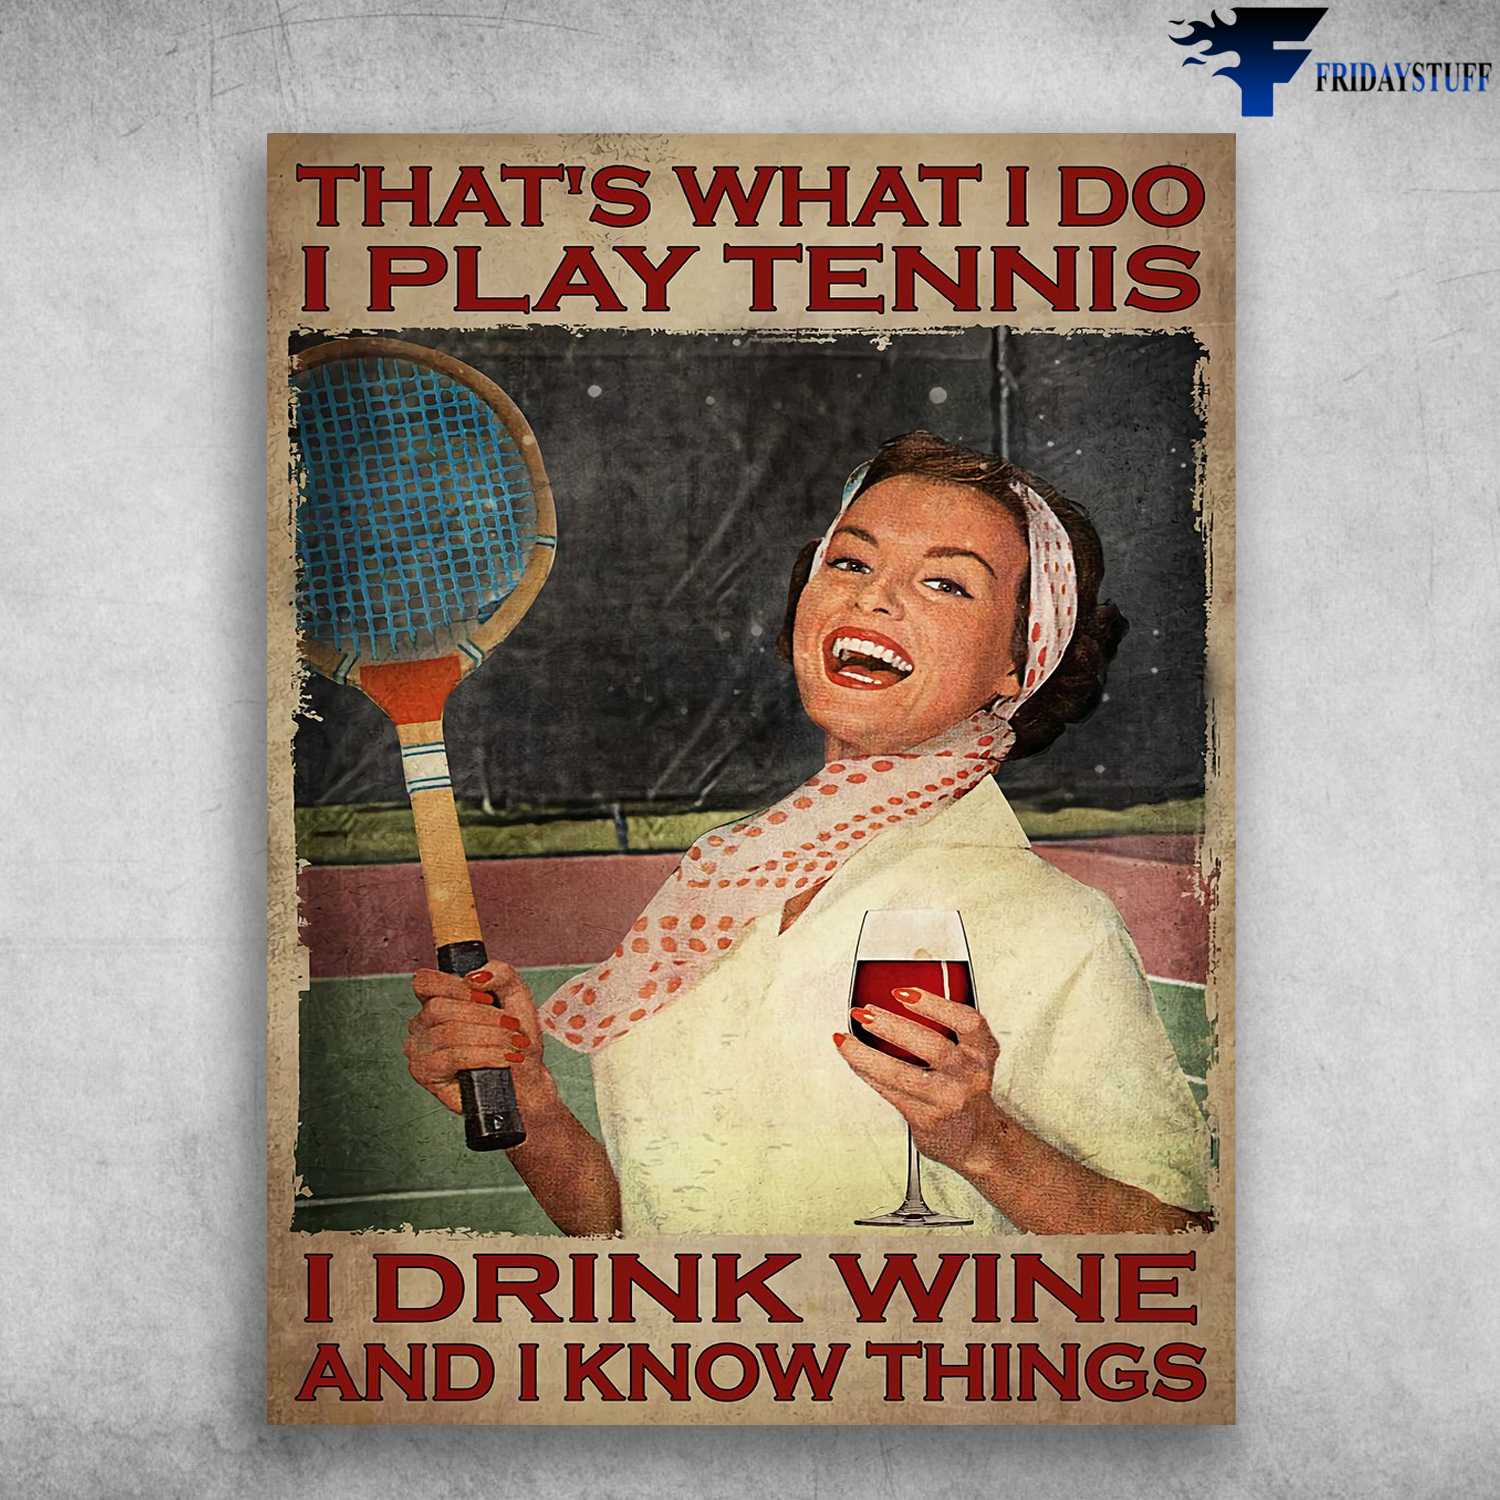 Tennis And Wine, Wine Lover - That's What I Do, I Play Tennis, I Drink Wine, And I Know Things